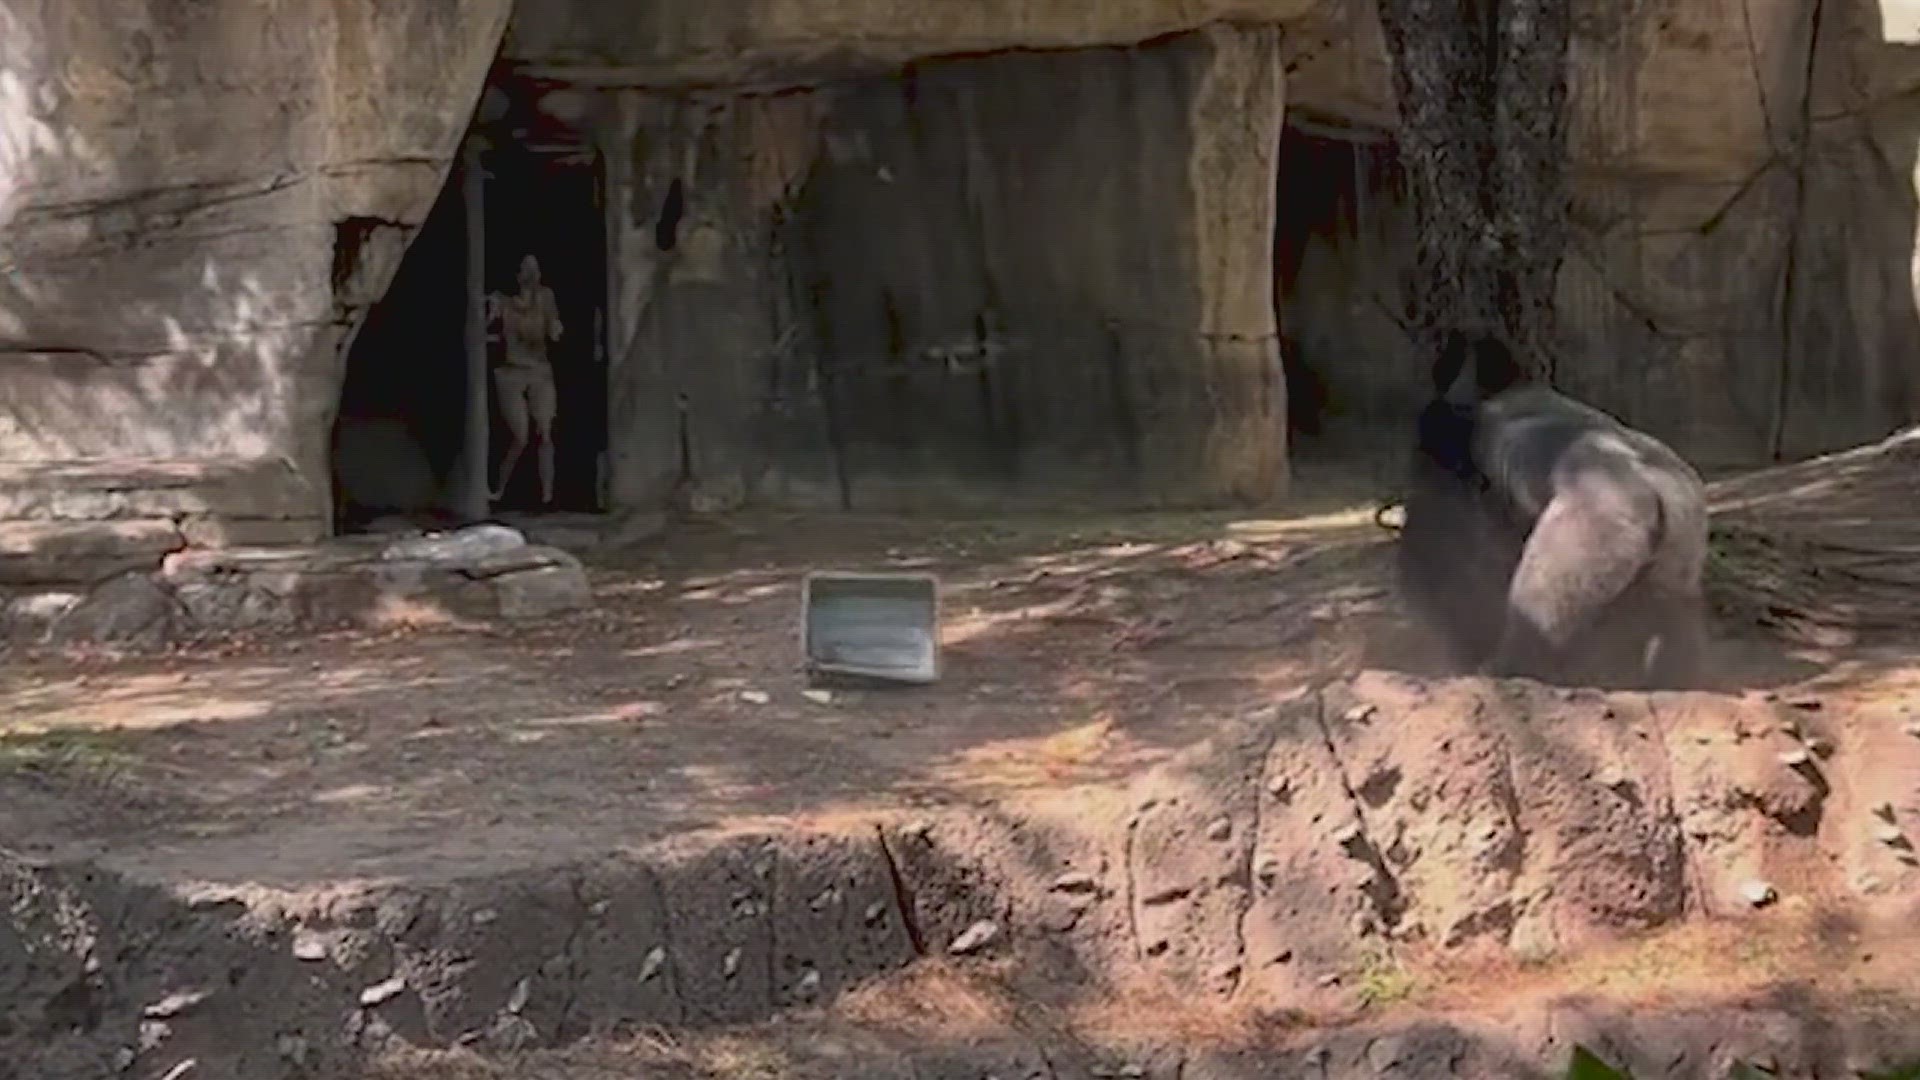 Throughout the video, you can hear the fear from zoo visitors as they make calls for help and even pray.